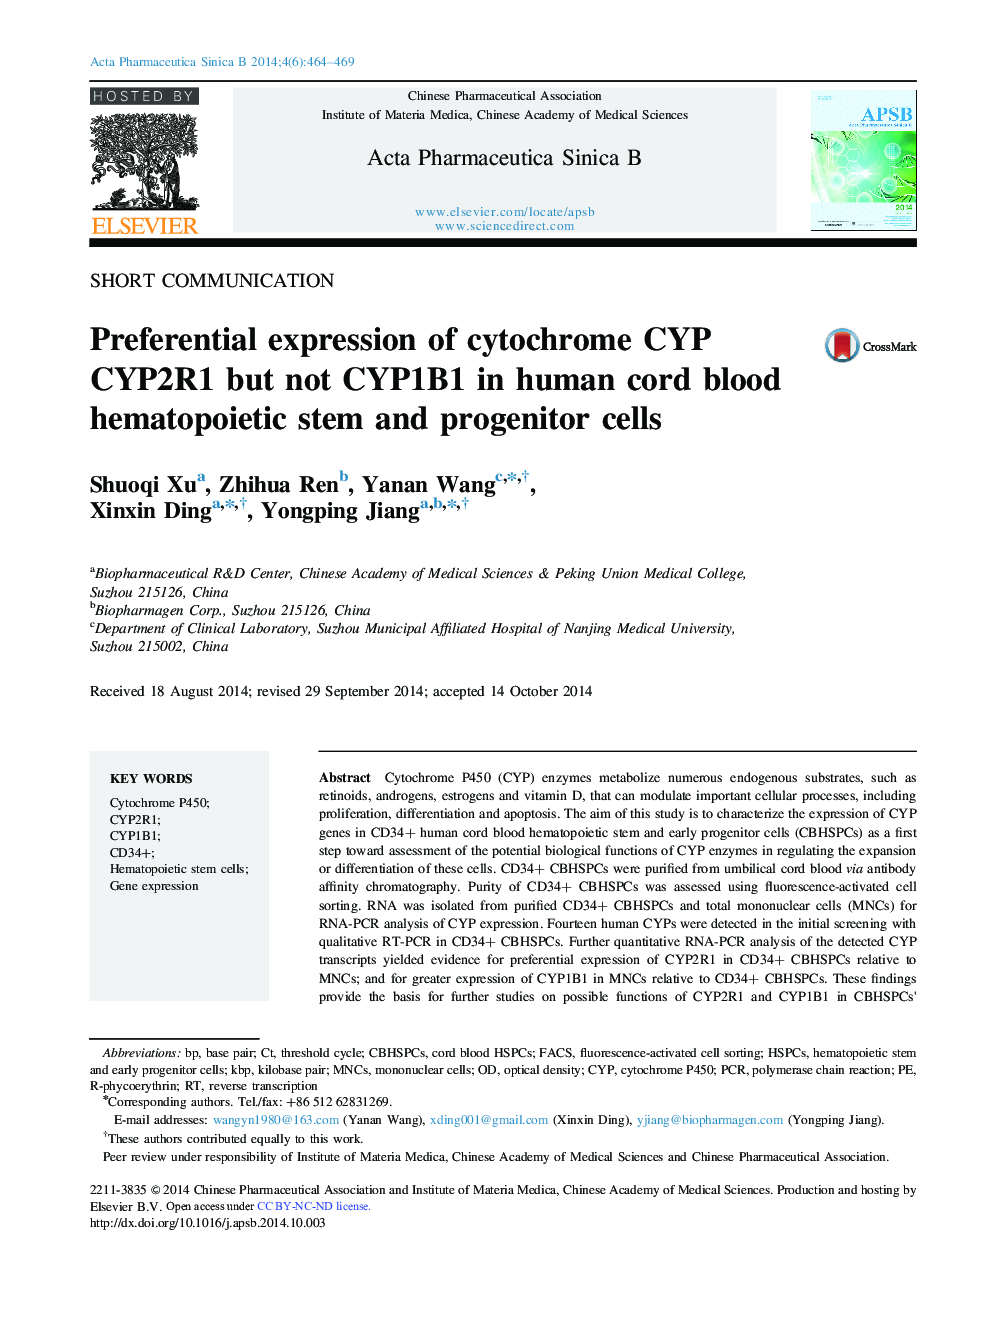 Preferential expression of cytochrome CYP CYP2R1 but not CYP1B1 in human cord blood hematopoietic stem and progenitor cells 